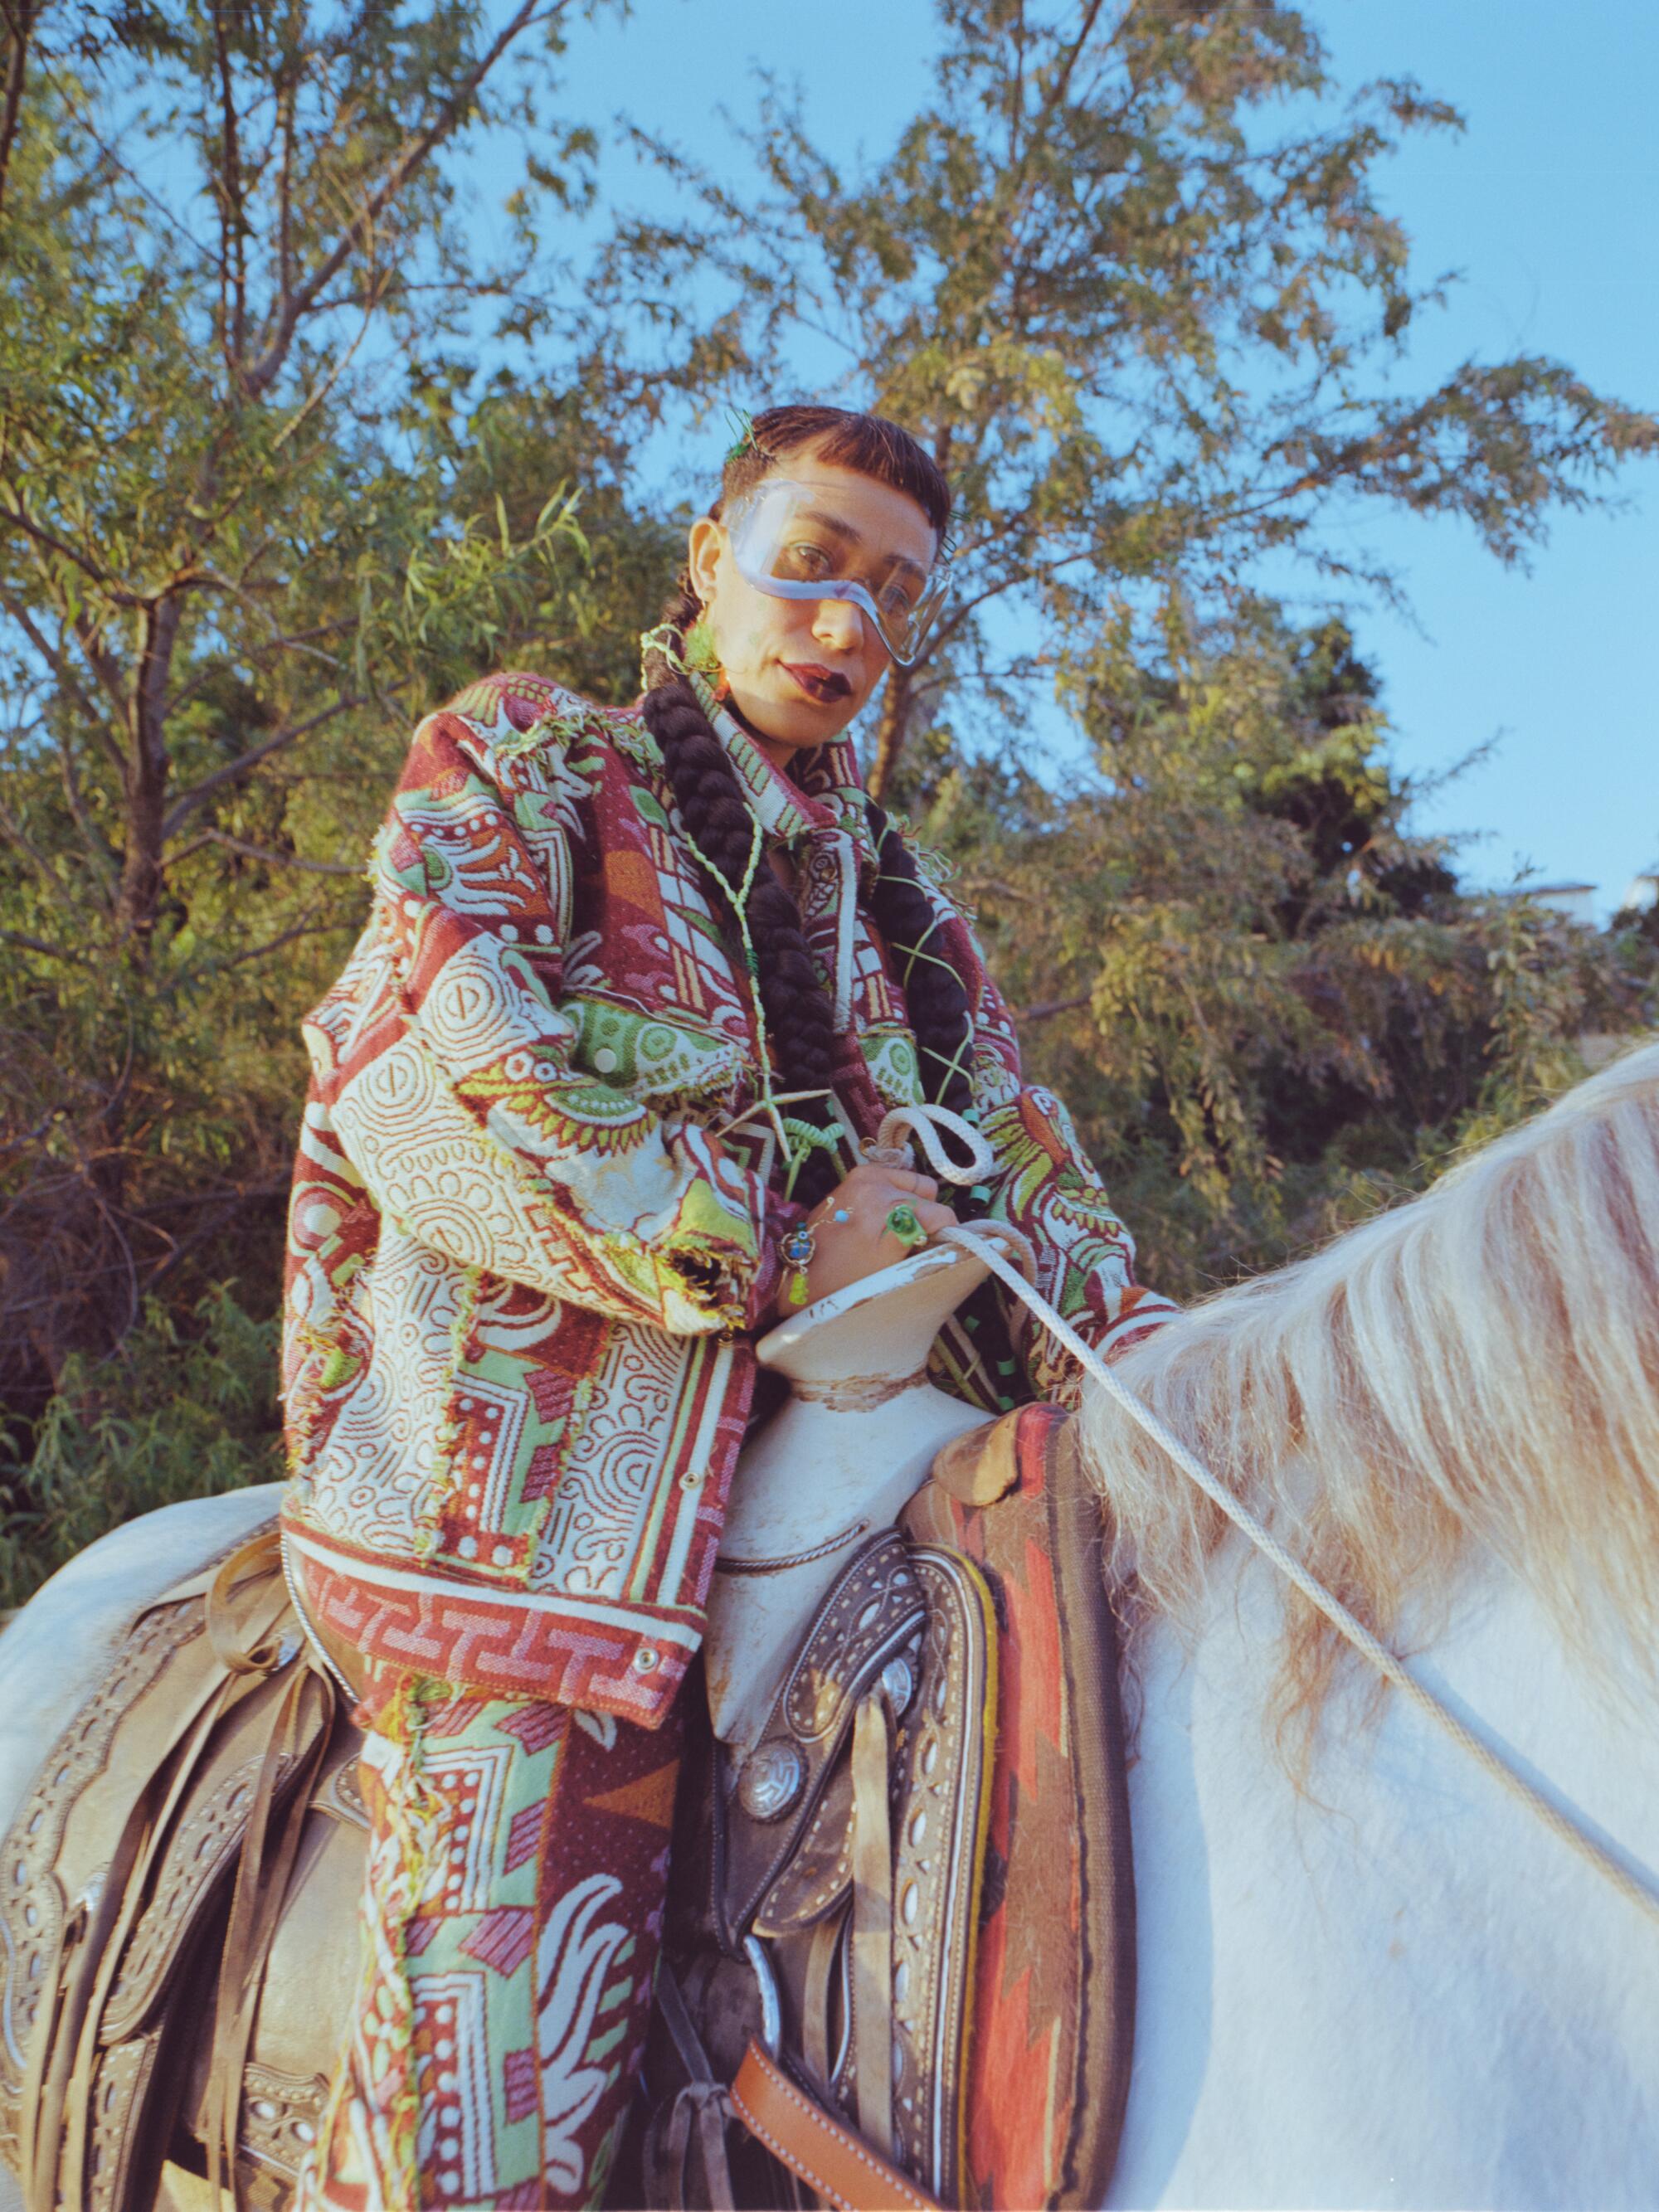 A model in a patterned outfit sits on a horse.